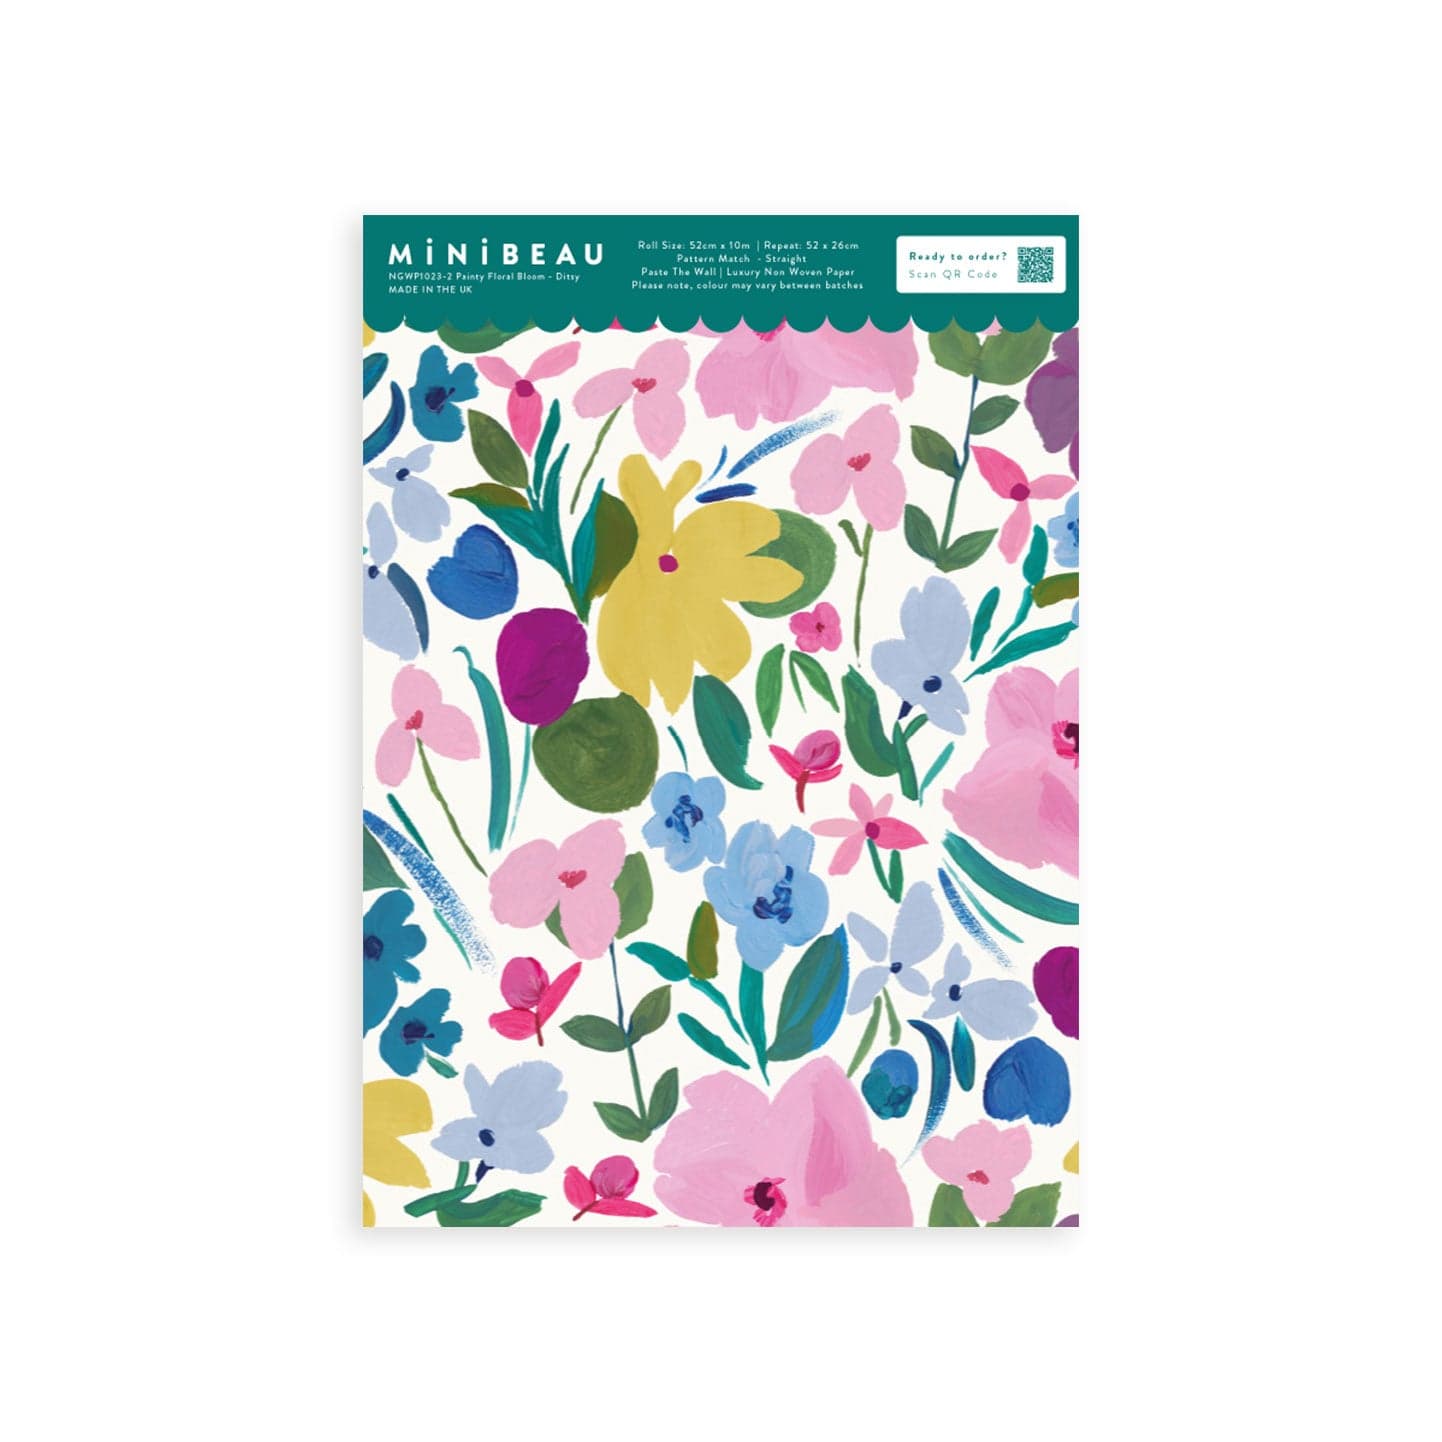 Wallpaper sample of  flowers in yellow, pink, blue and fuchsia with green stalks and leaves.